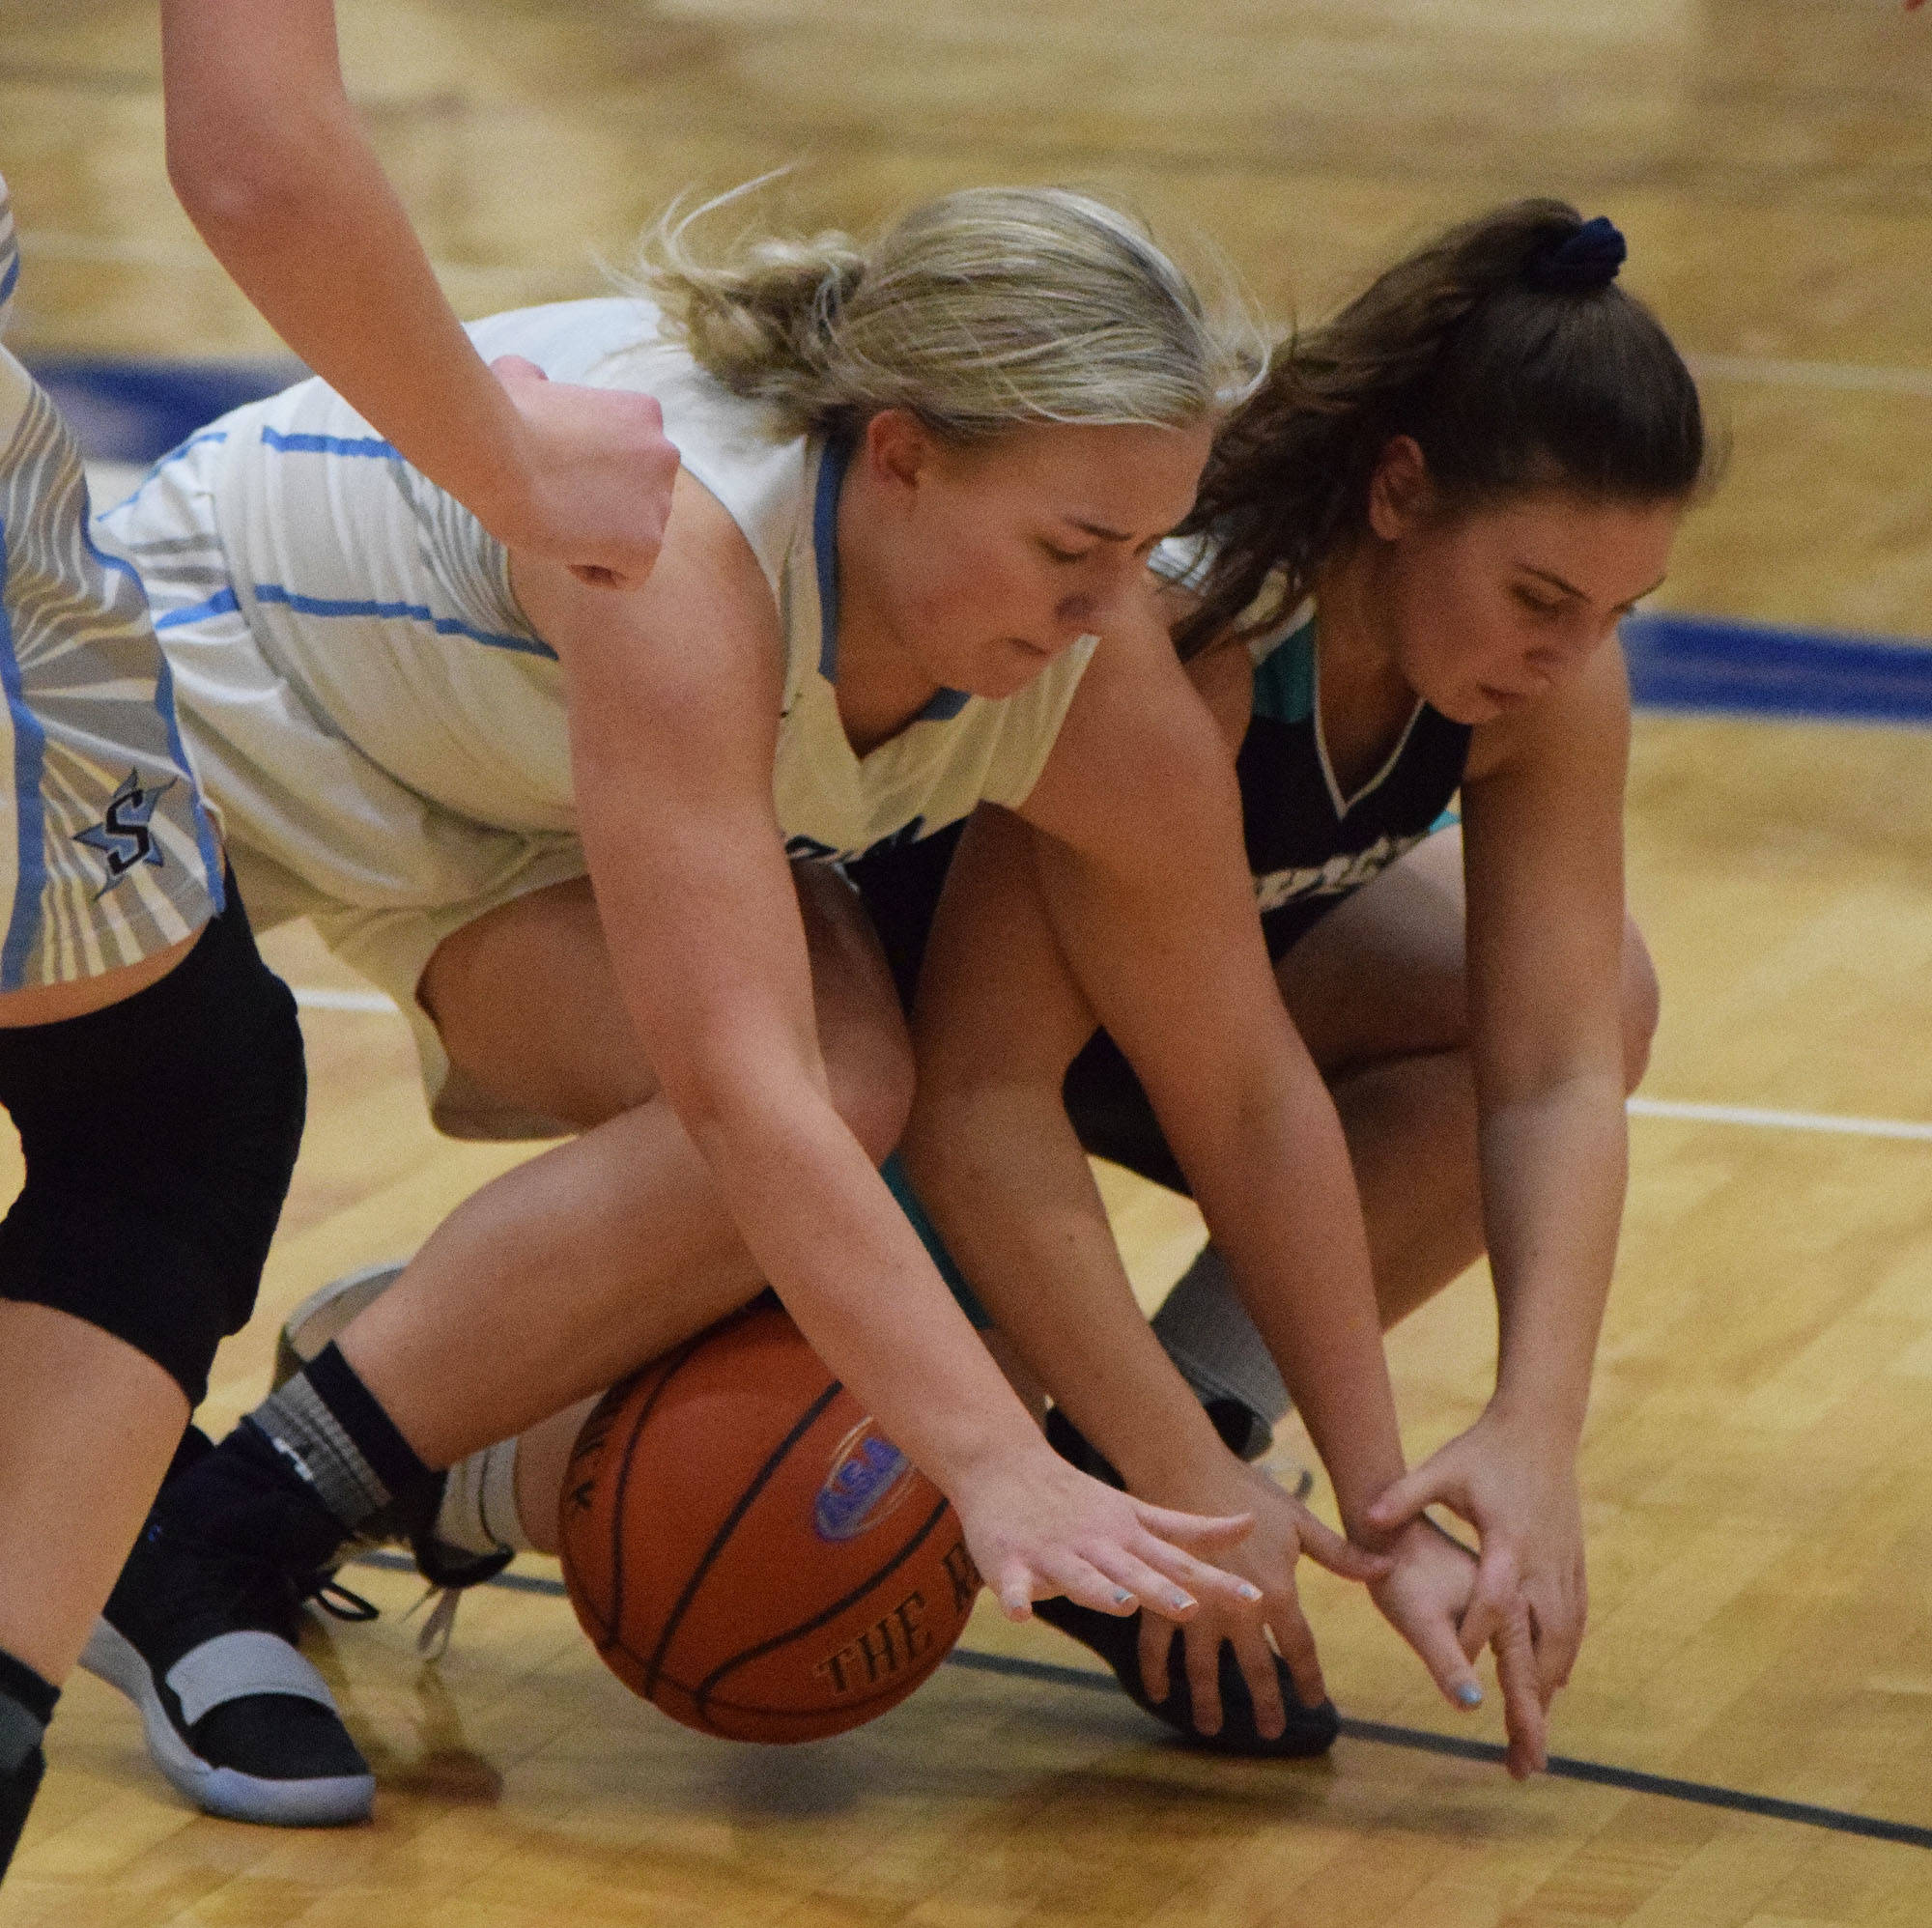 Soldotna’s Brittani Blossom (left) and Nikiski’s Kelsey Clark battle for the ball Tuesday night in a nonconference game at Soldotna High School. (Photo by Joey Klecka/Peninsula Carion)